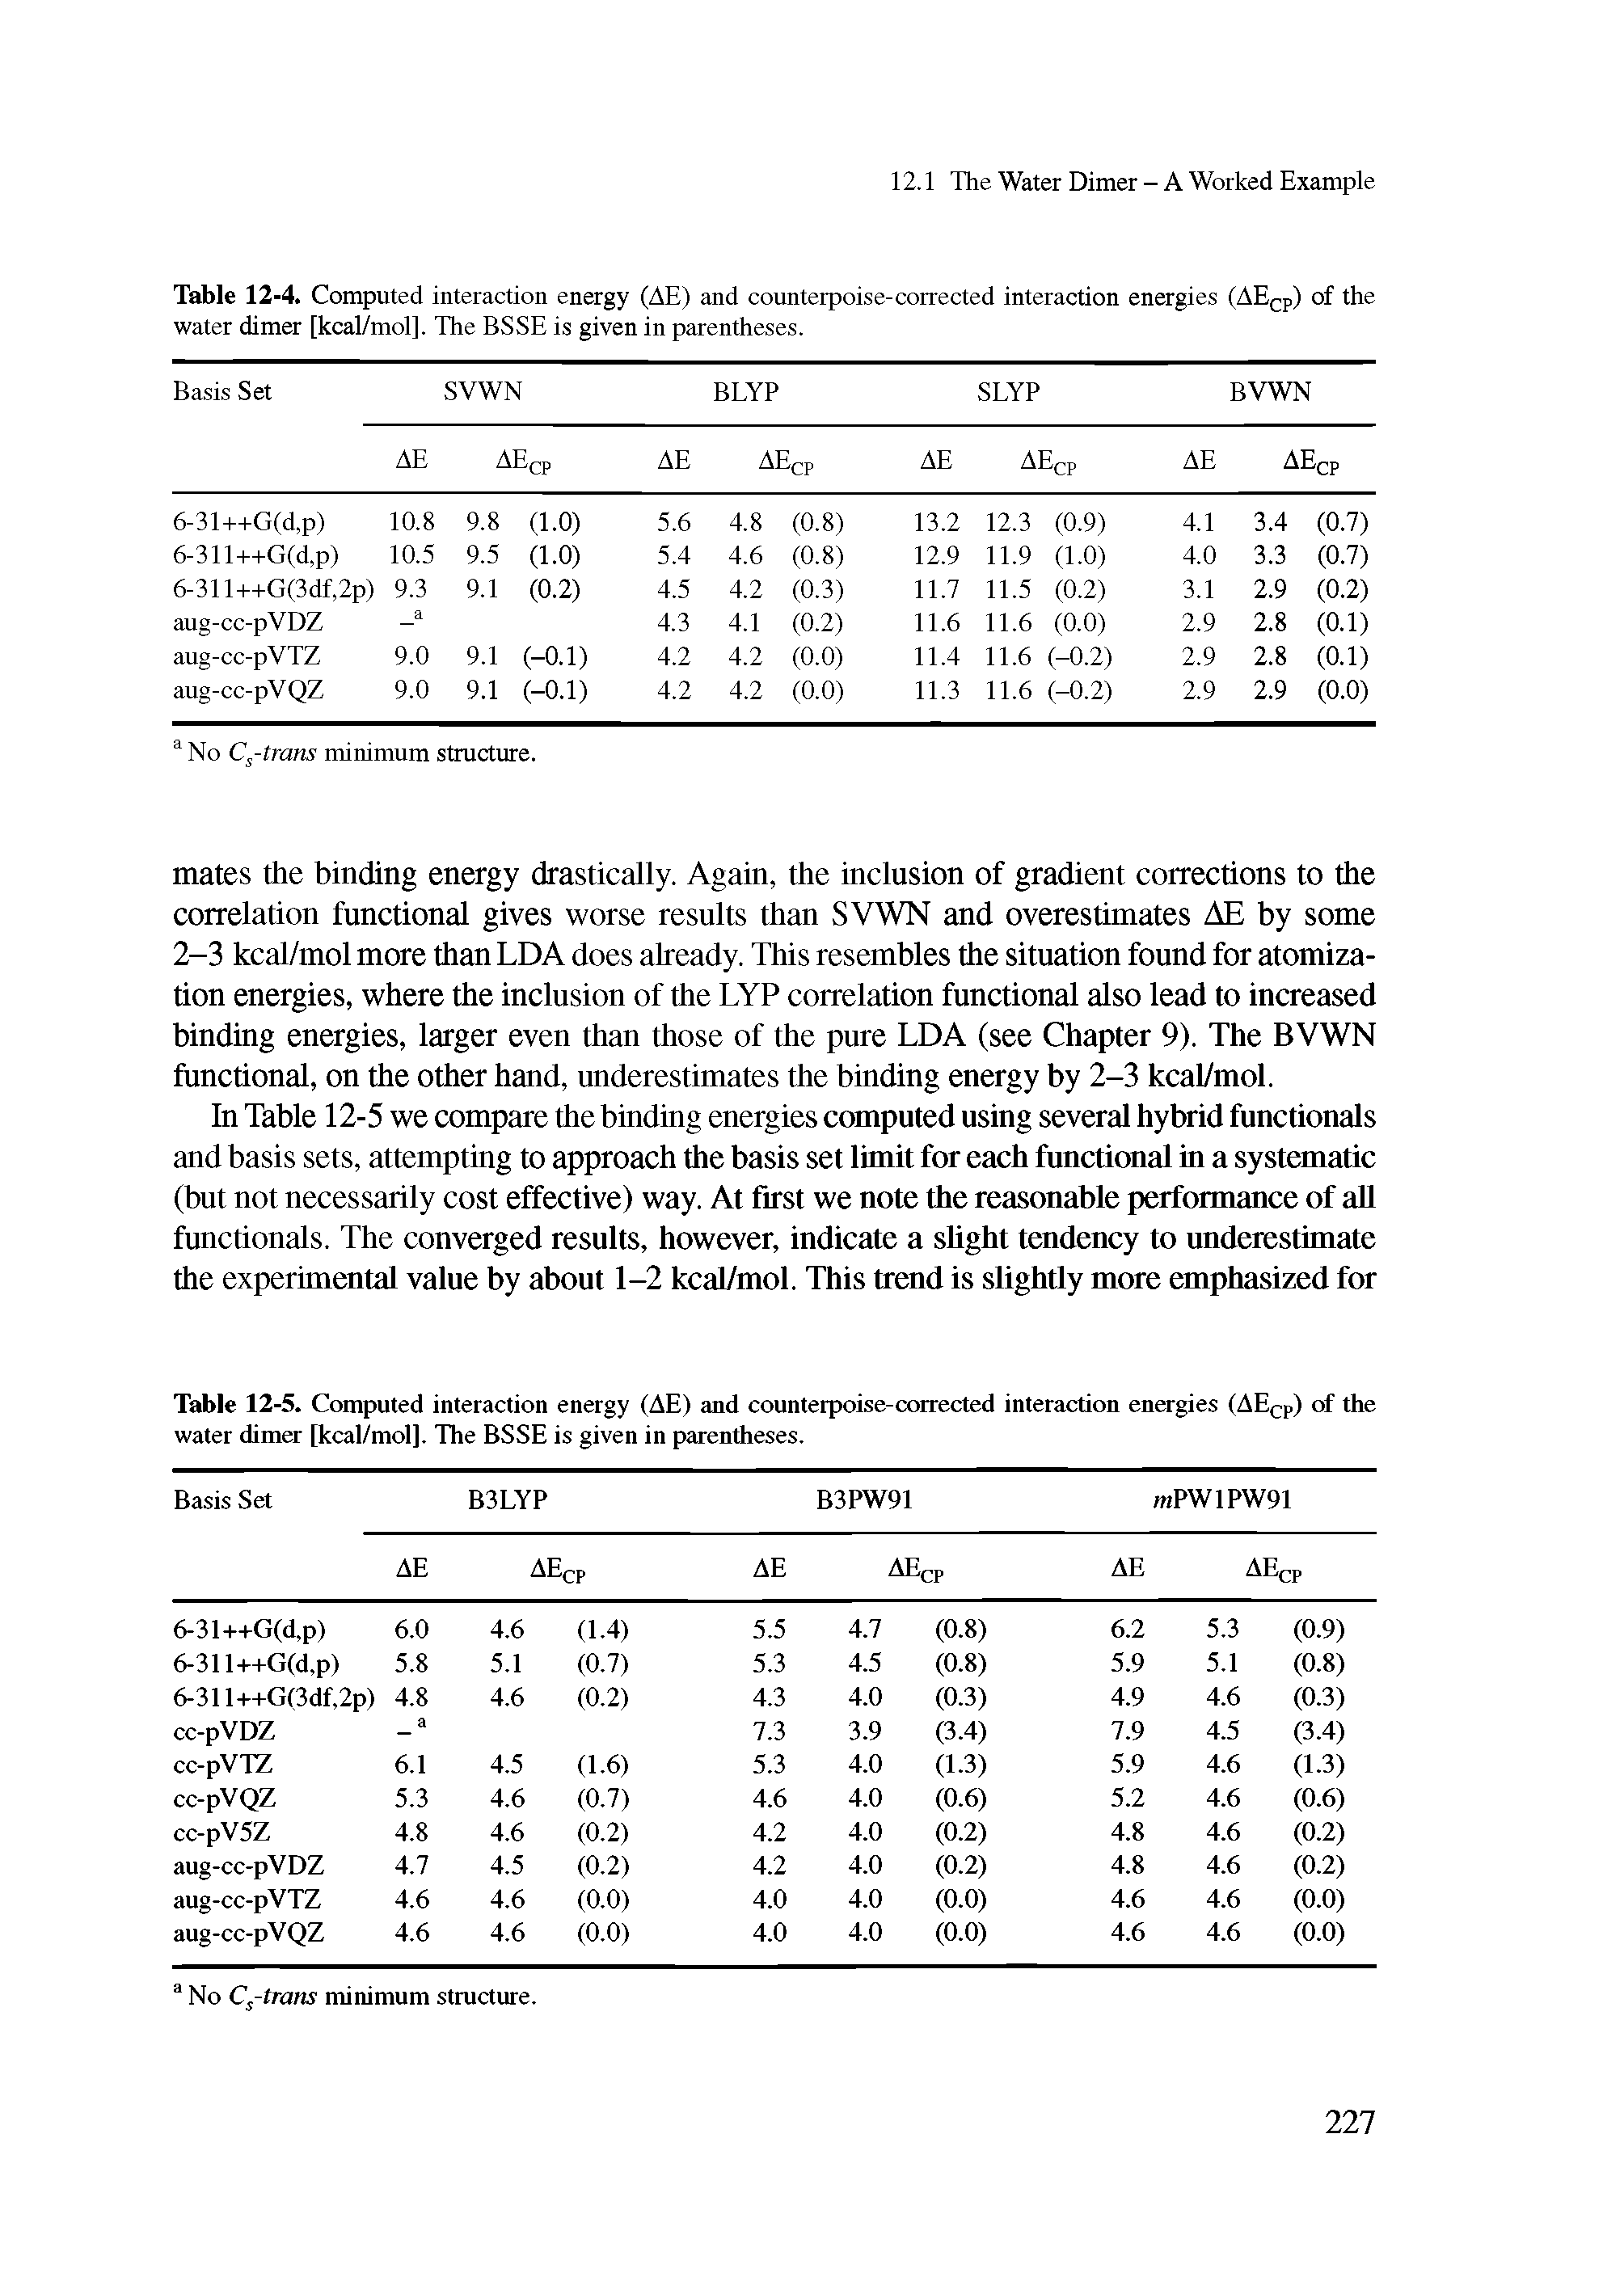 Table 12-4. Computed interaction energy (AE) and counterpoise-corrected interaction energies (AECP) of the water dimer [kcal/mol]. The BSSE is given in parentheses.